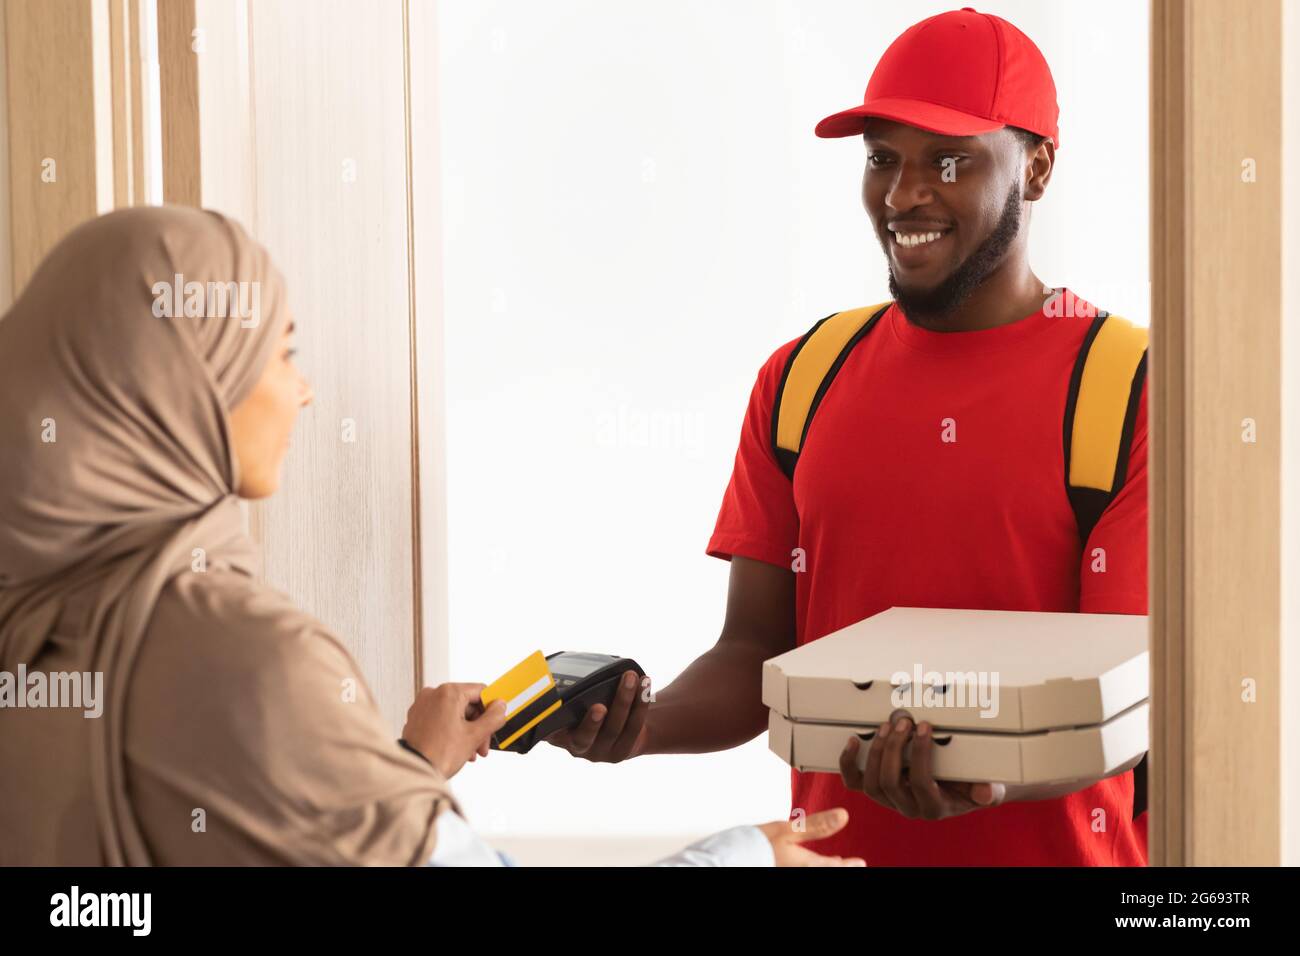 Deliveryman holding POS machine for payment, woman paying with card Stock Photo